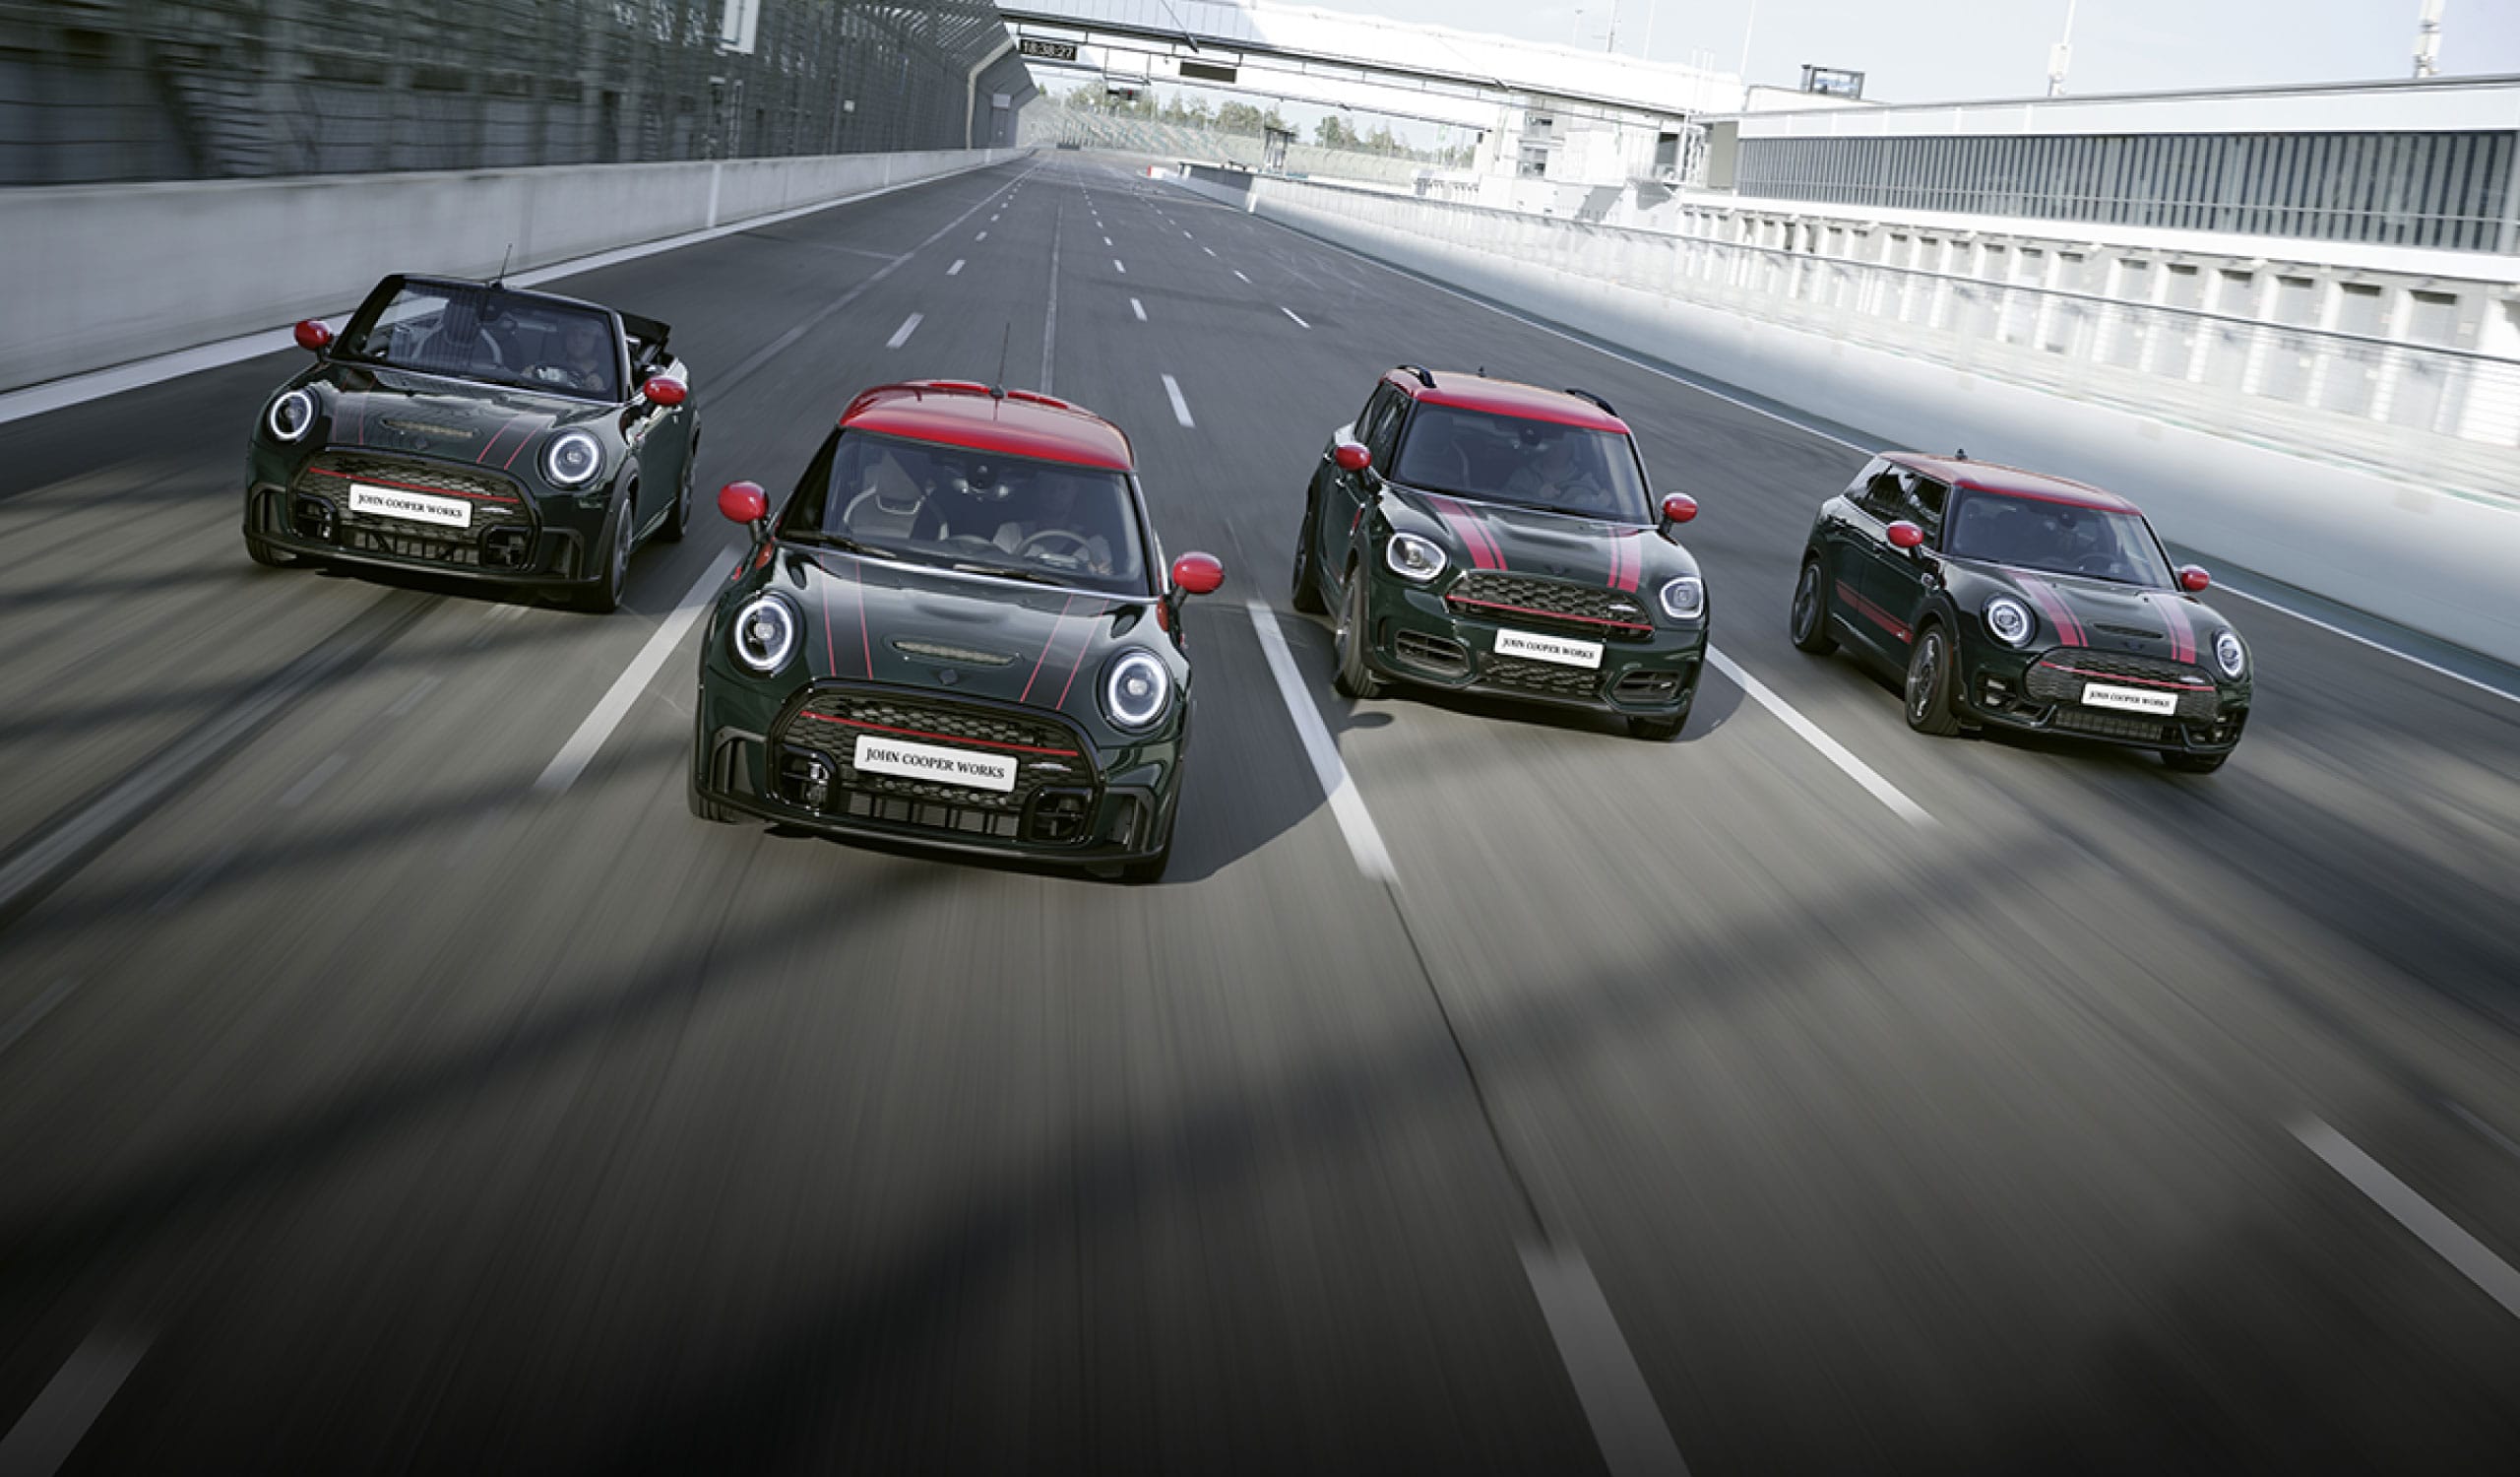 Front view of four dark colored MINI John Cooper Works vehicles racing alongside each other on a racetrack with white fencing on the right side.